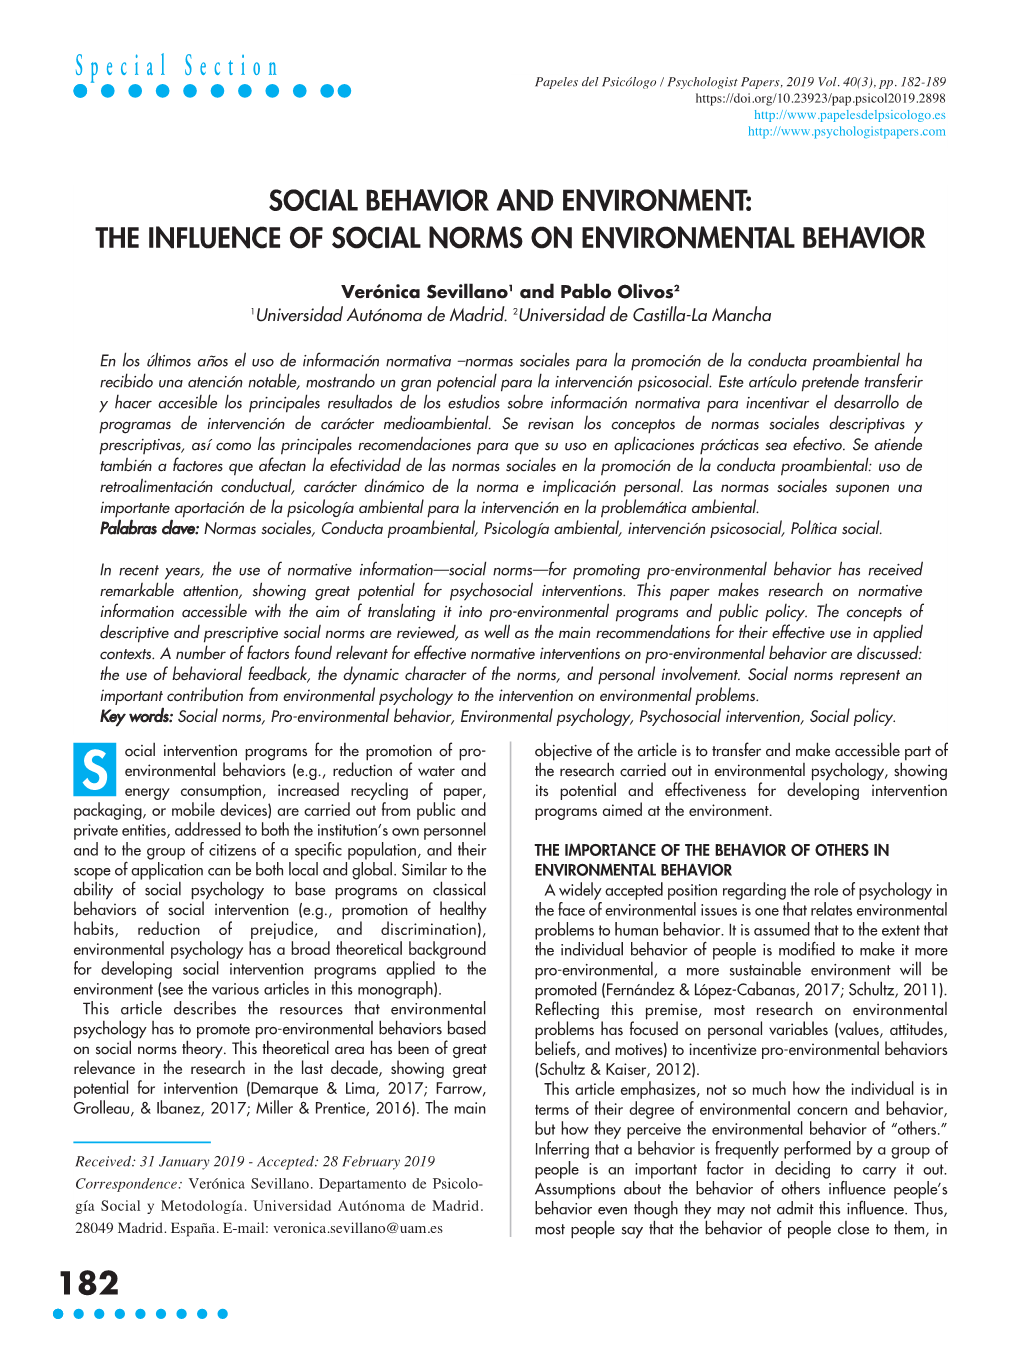 Social Behavior and Environment: the Influence of Social Norms on Environmental Behavior